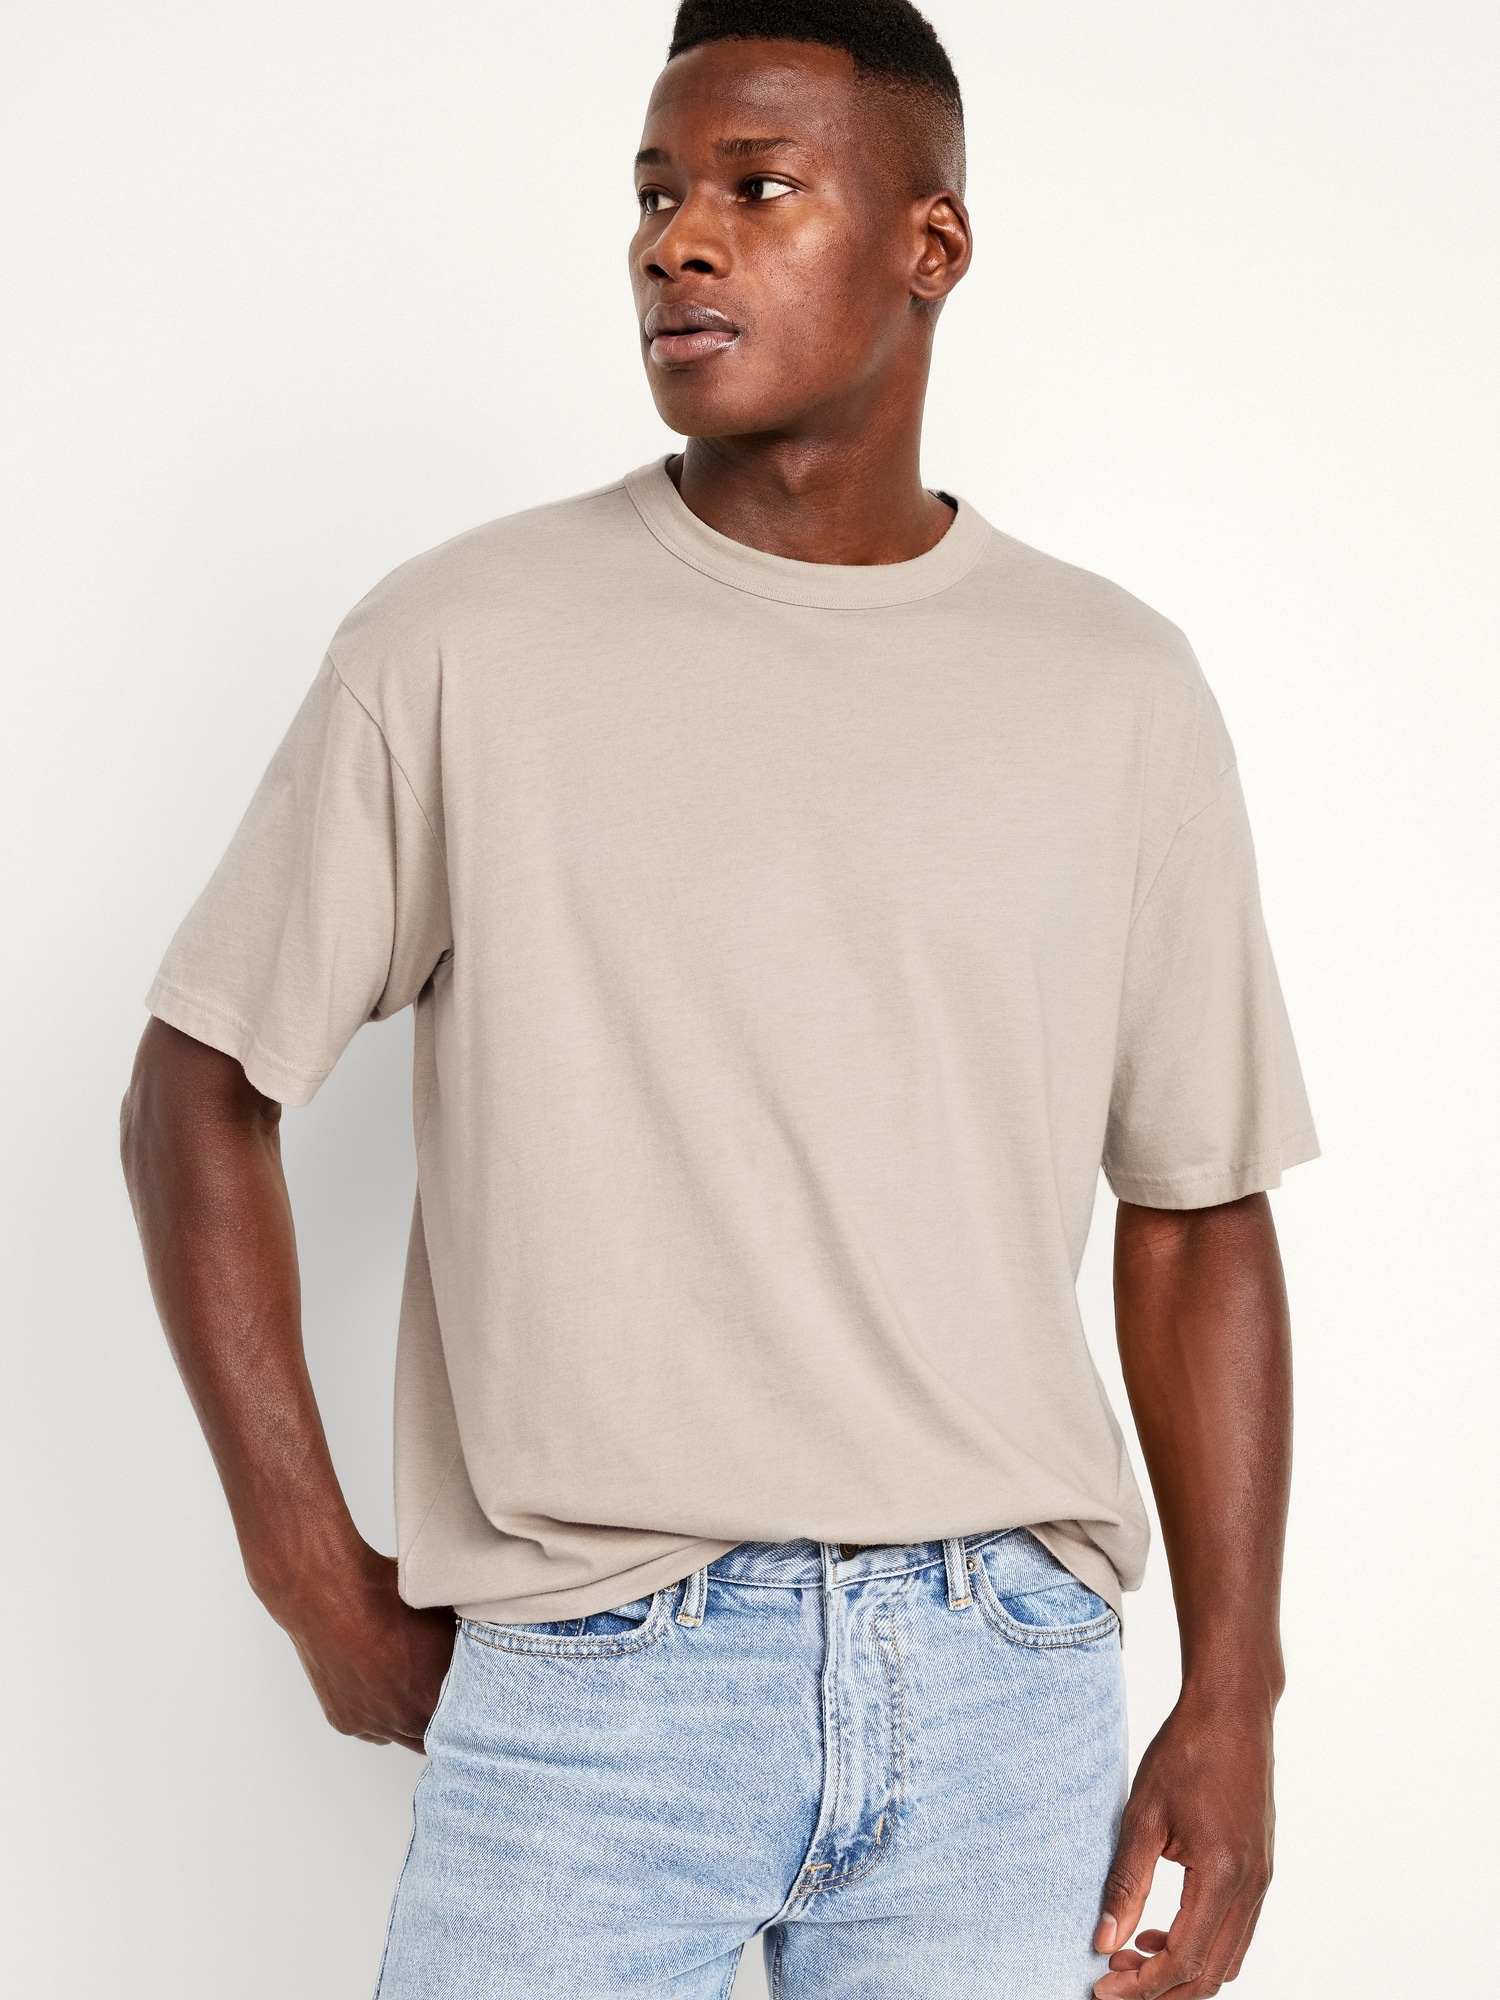 Loose-Fit Crew-Neck T-Shirt